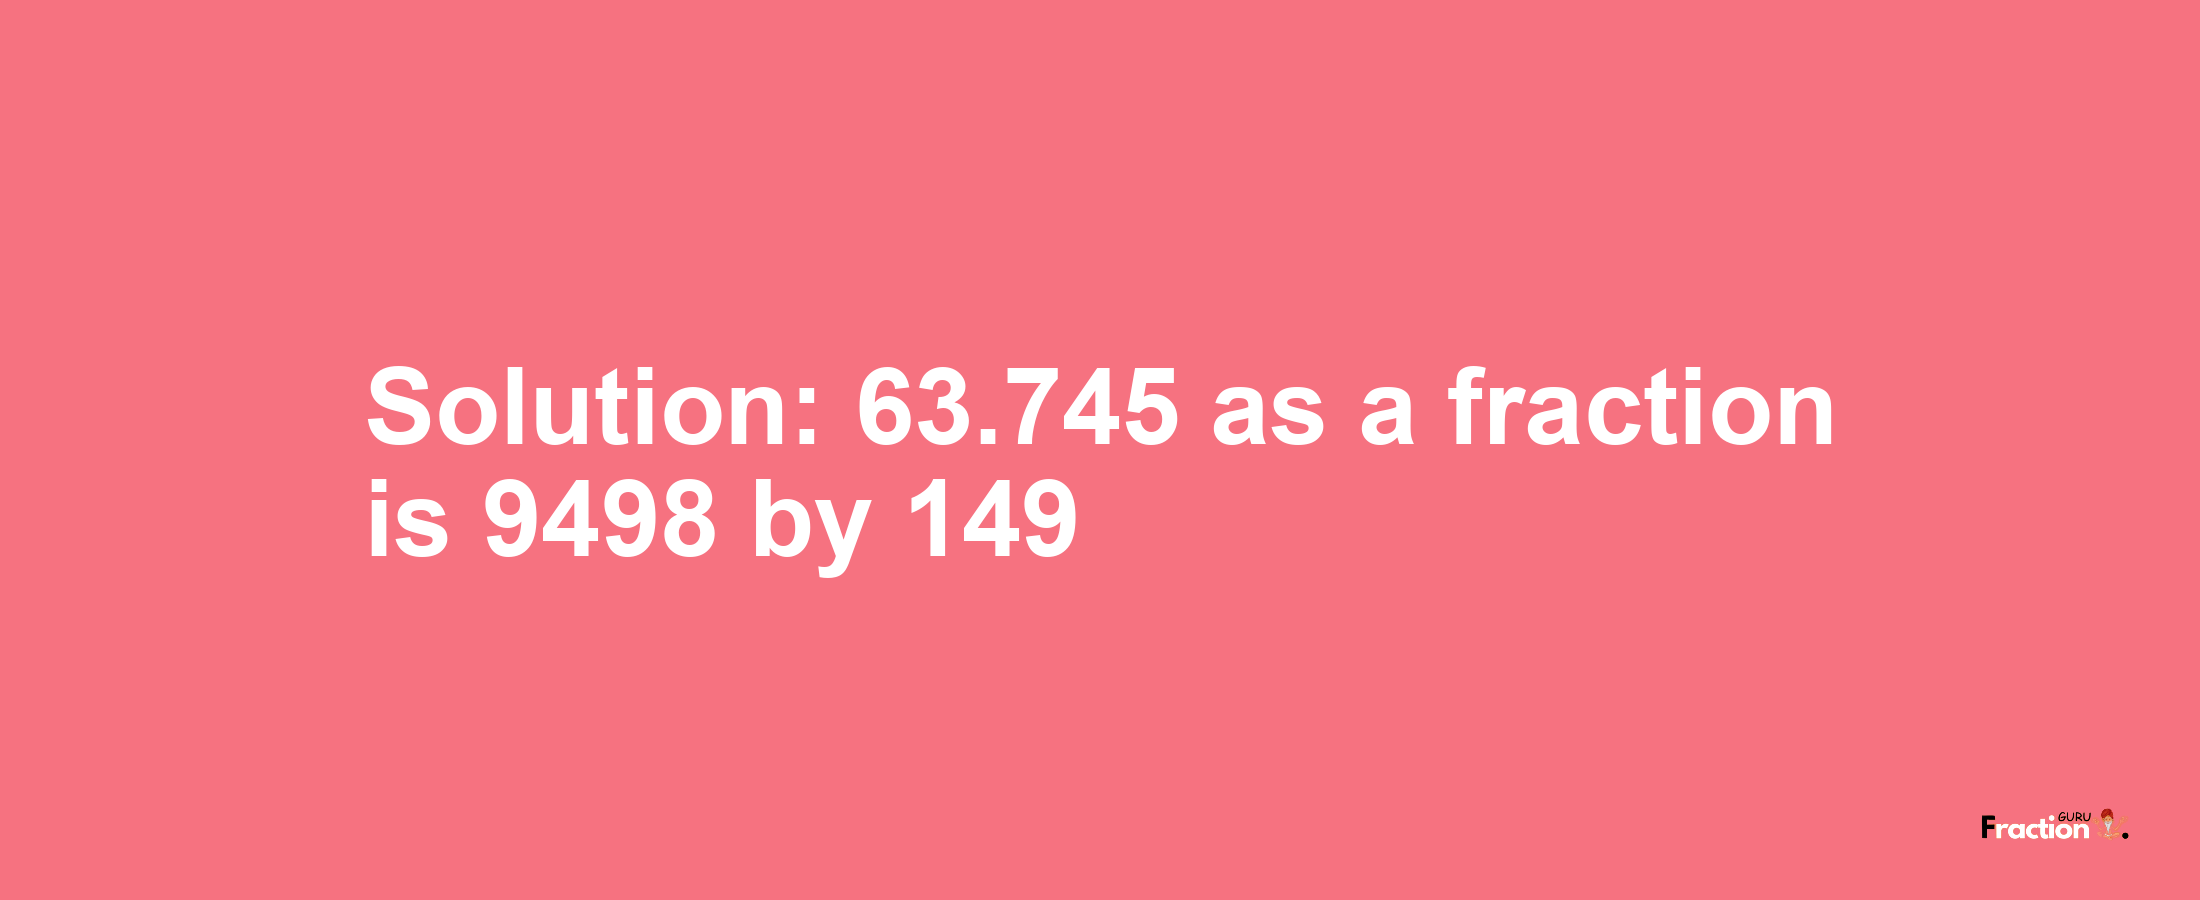 Solution:63.745 as a fraction is 9498/149